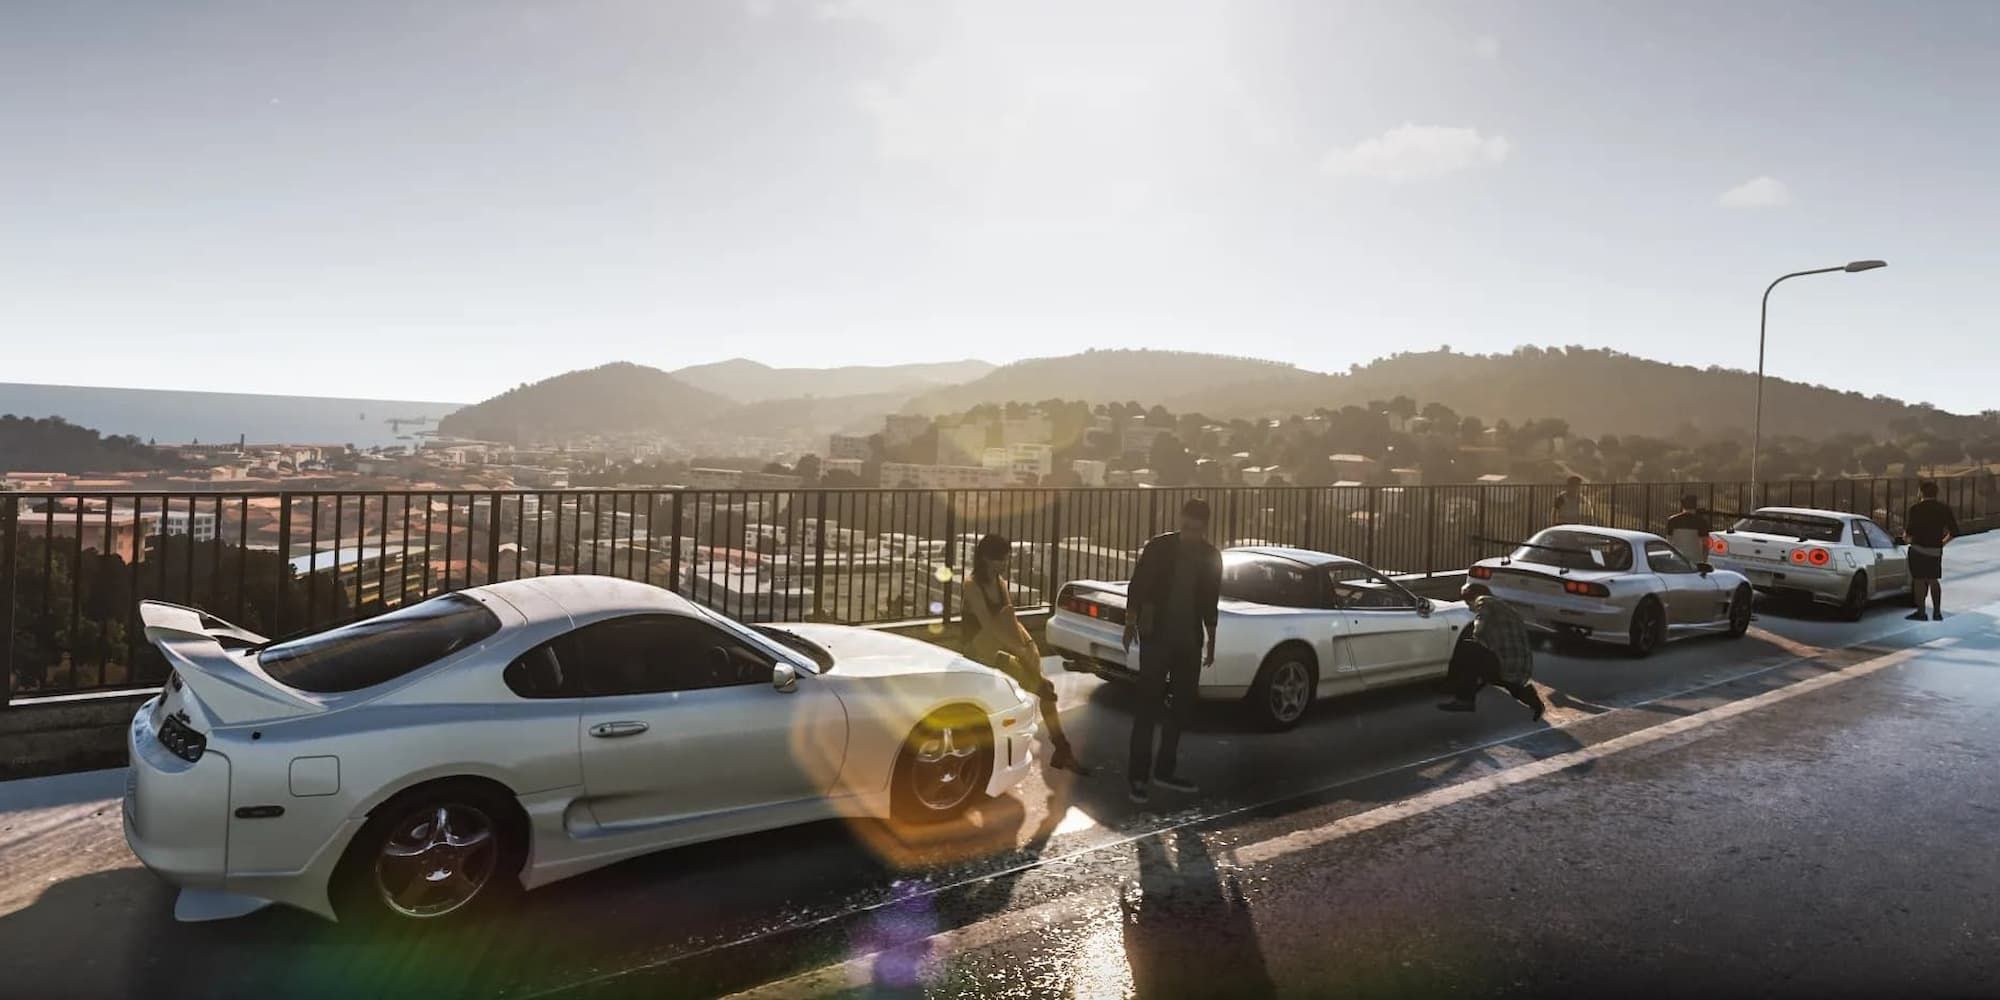 Four white cars line up near a fence on the road with their owners hanging out around them in Forza Horizon 2.